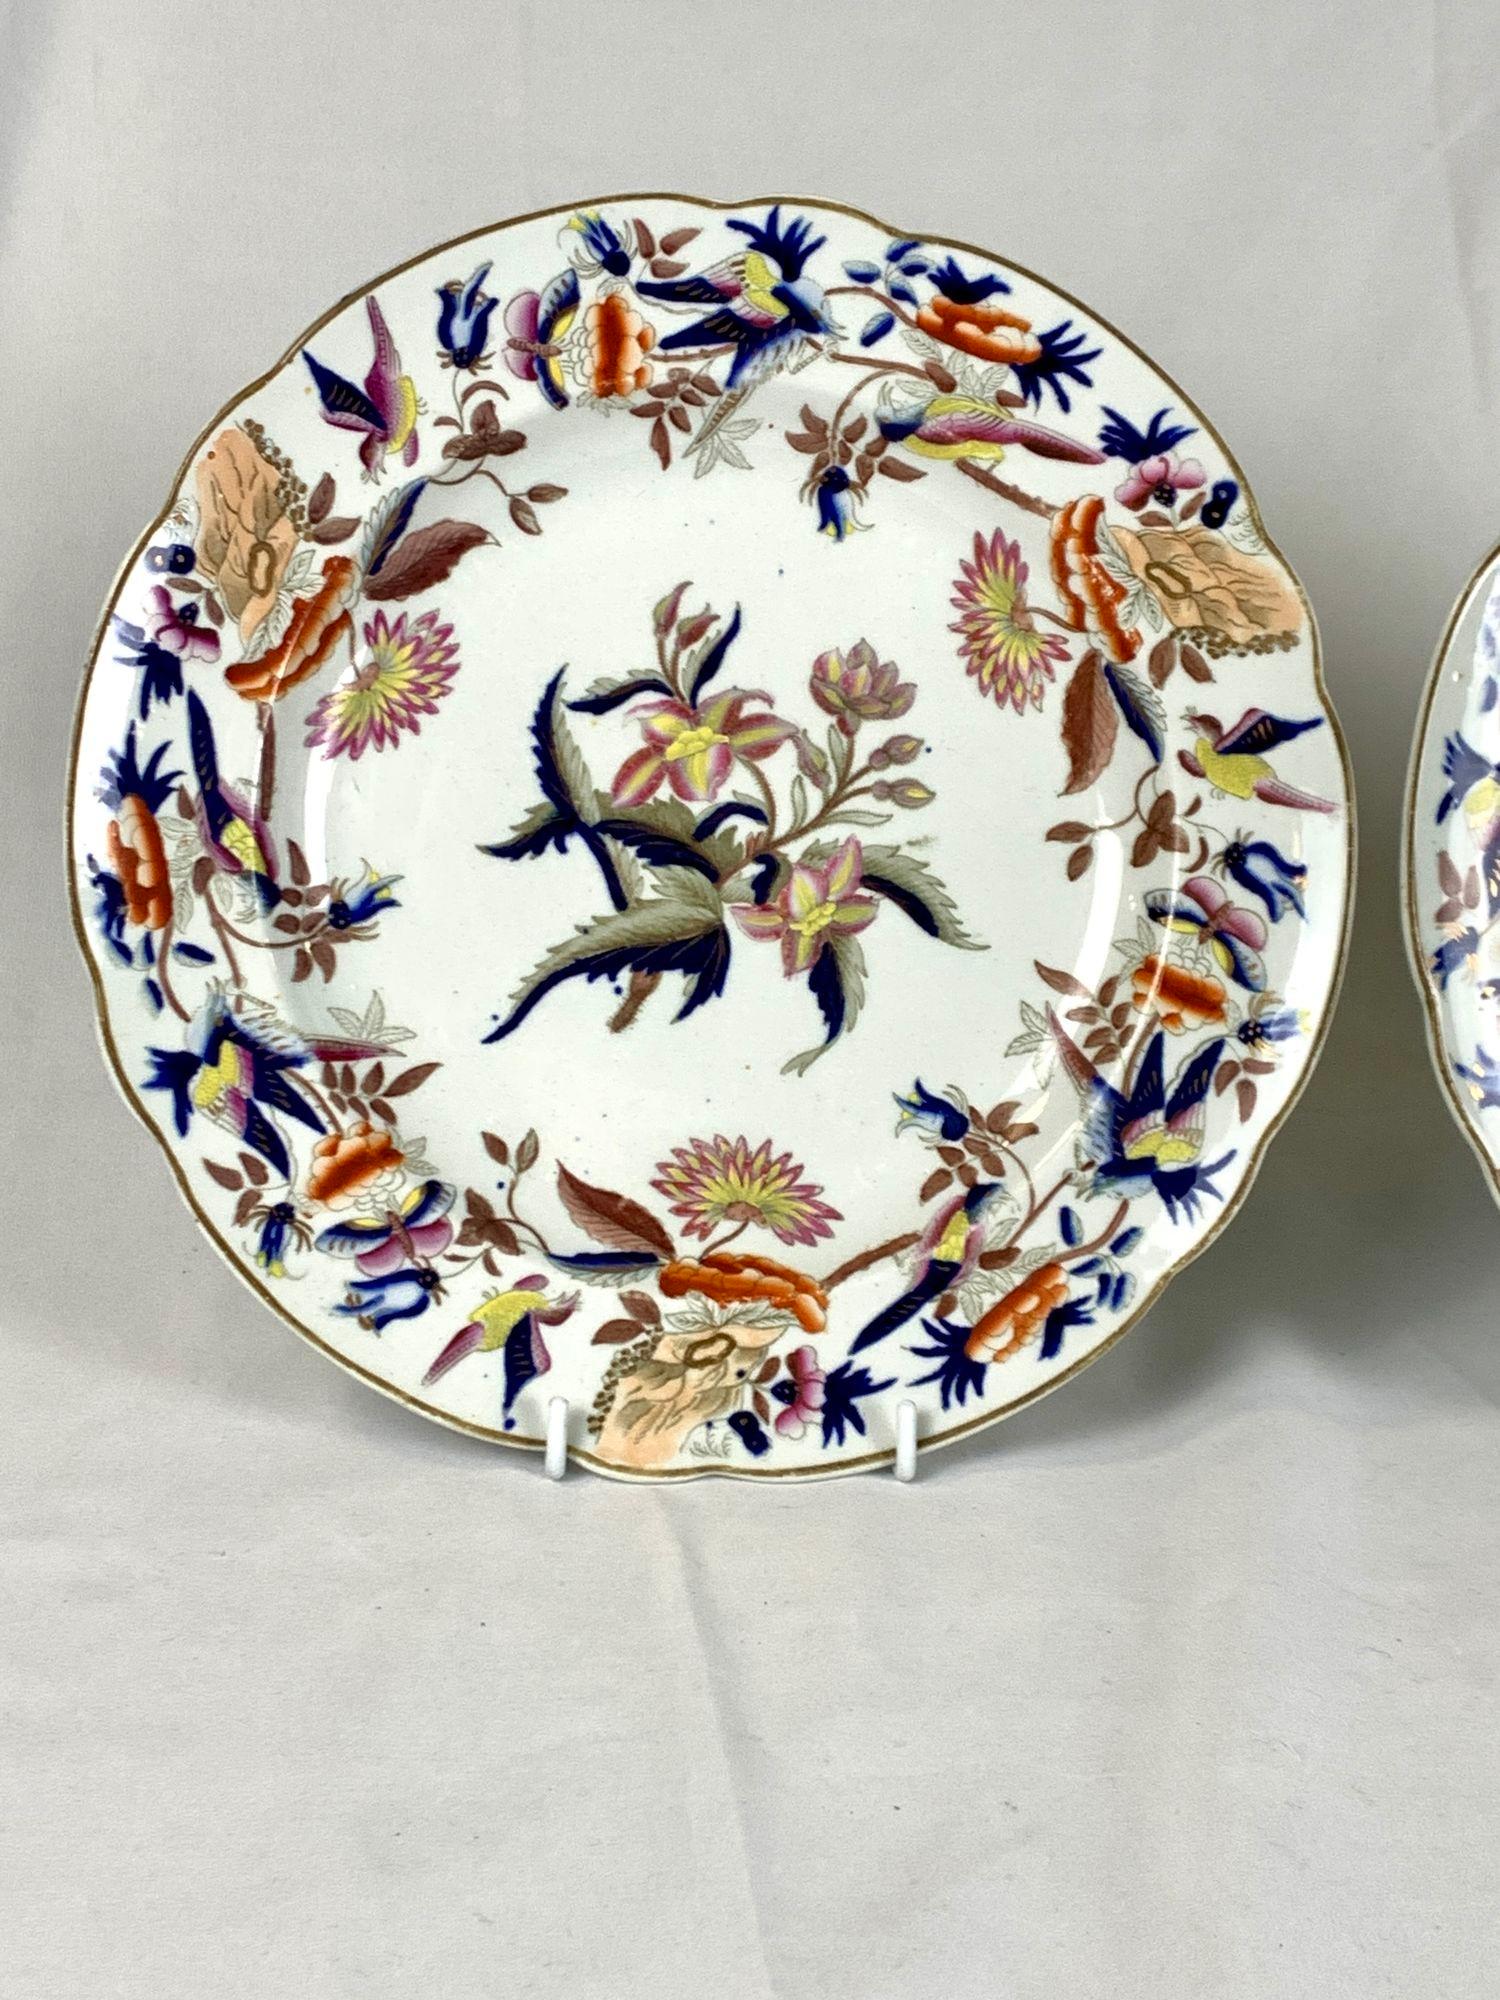 This pair of dishes feature a lively design of waterlilies and songbirds in a lovely array of colors.
The flowers are painted in shades of pink, yellow, and green, while the stems and leaves are adorned with gilt, deep blue, and grey.
The border is